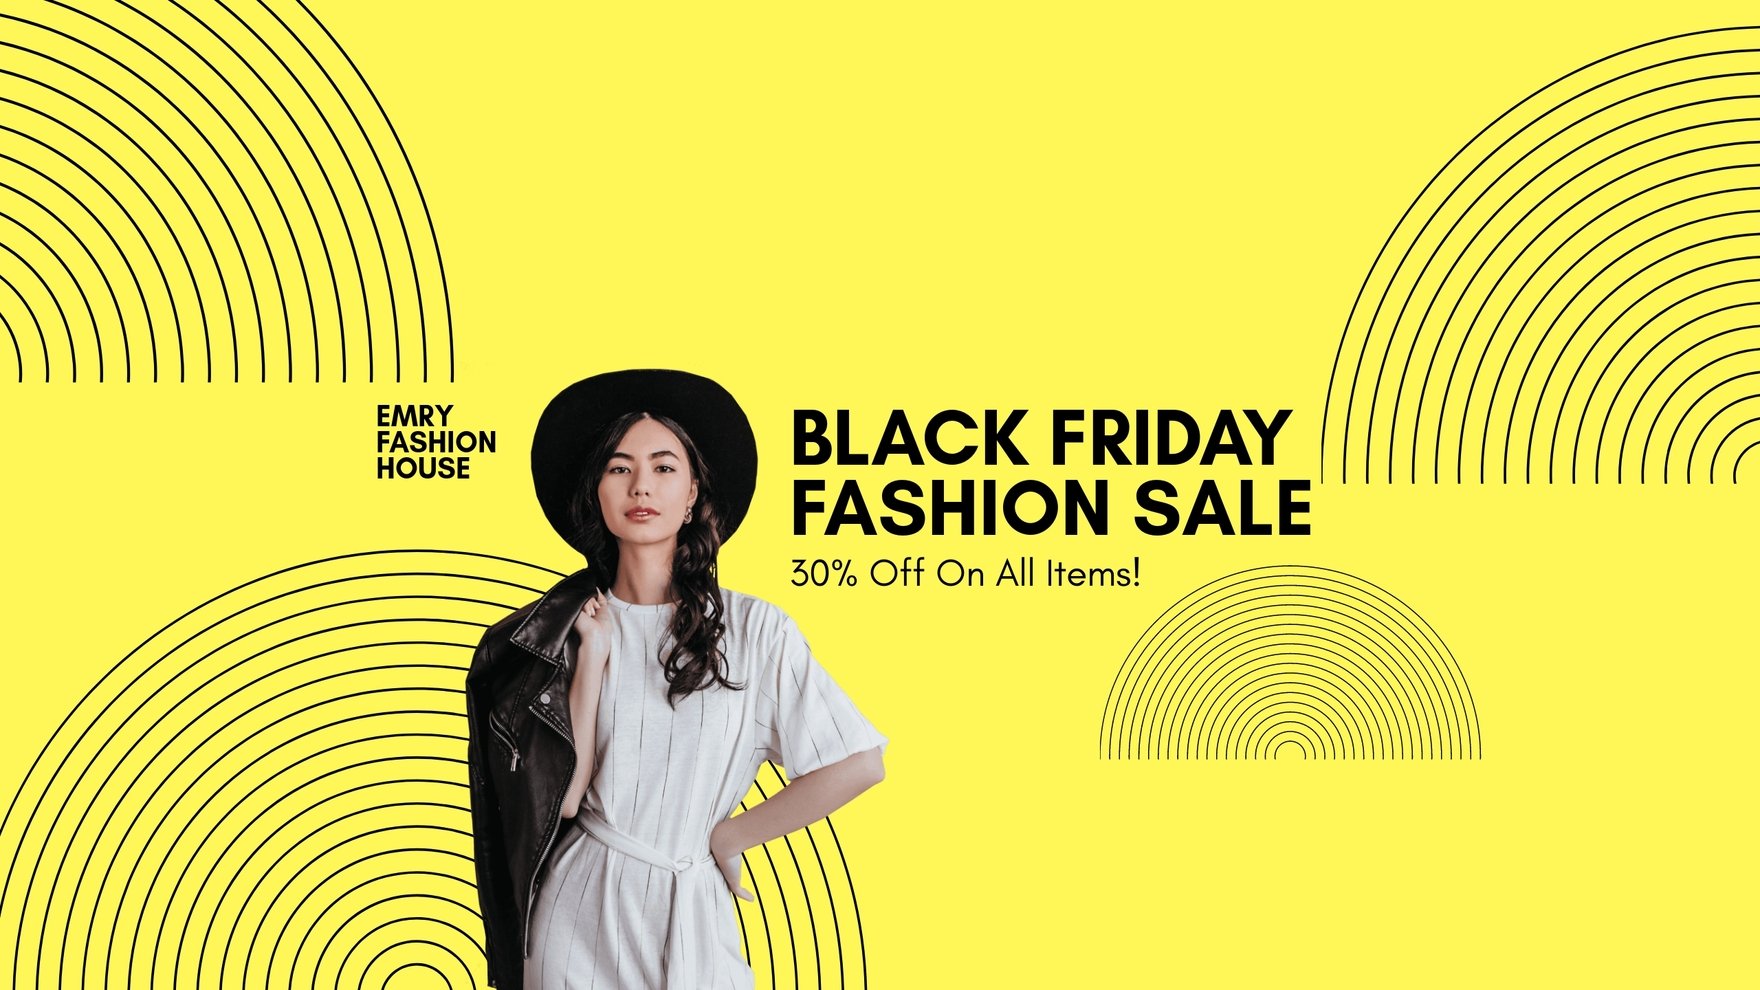 Free Black Friday Fashion Sale YouTube Banner Template